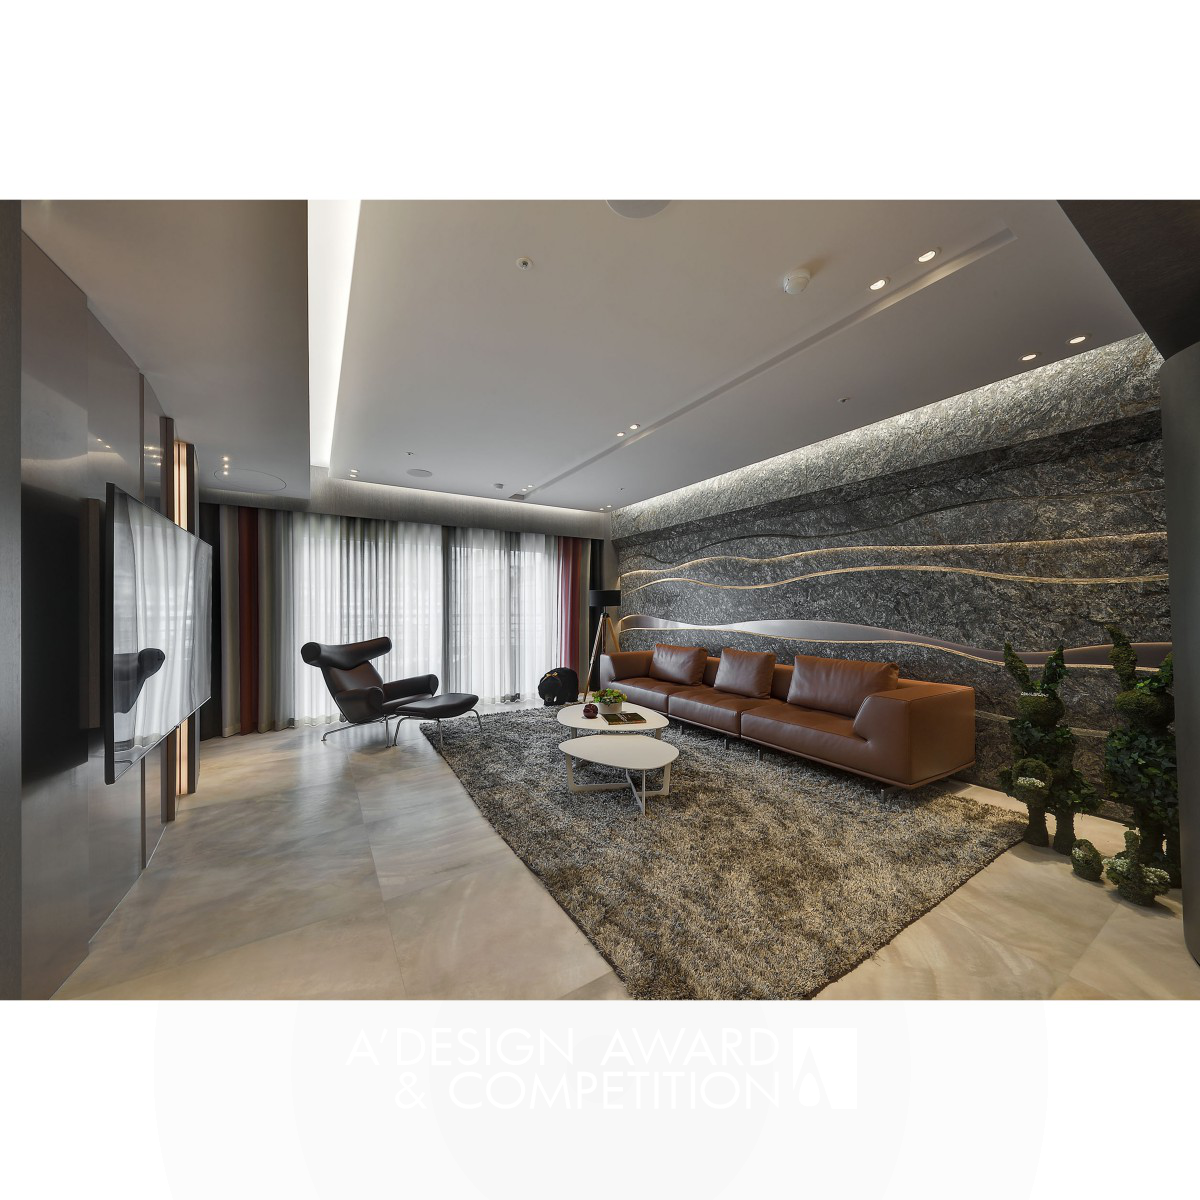 Pro_Art Interior Design Co., Ltd. Unveils "Magnificent Scenery" Residential Project